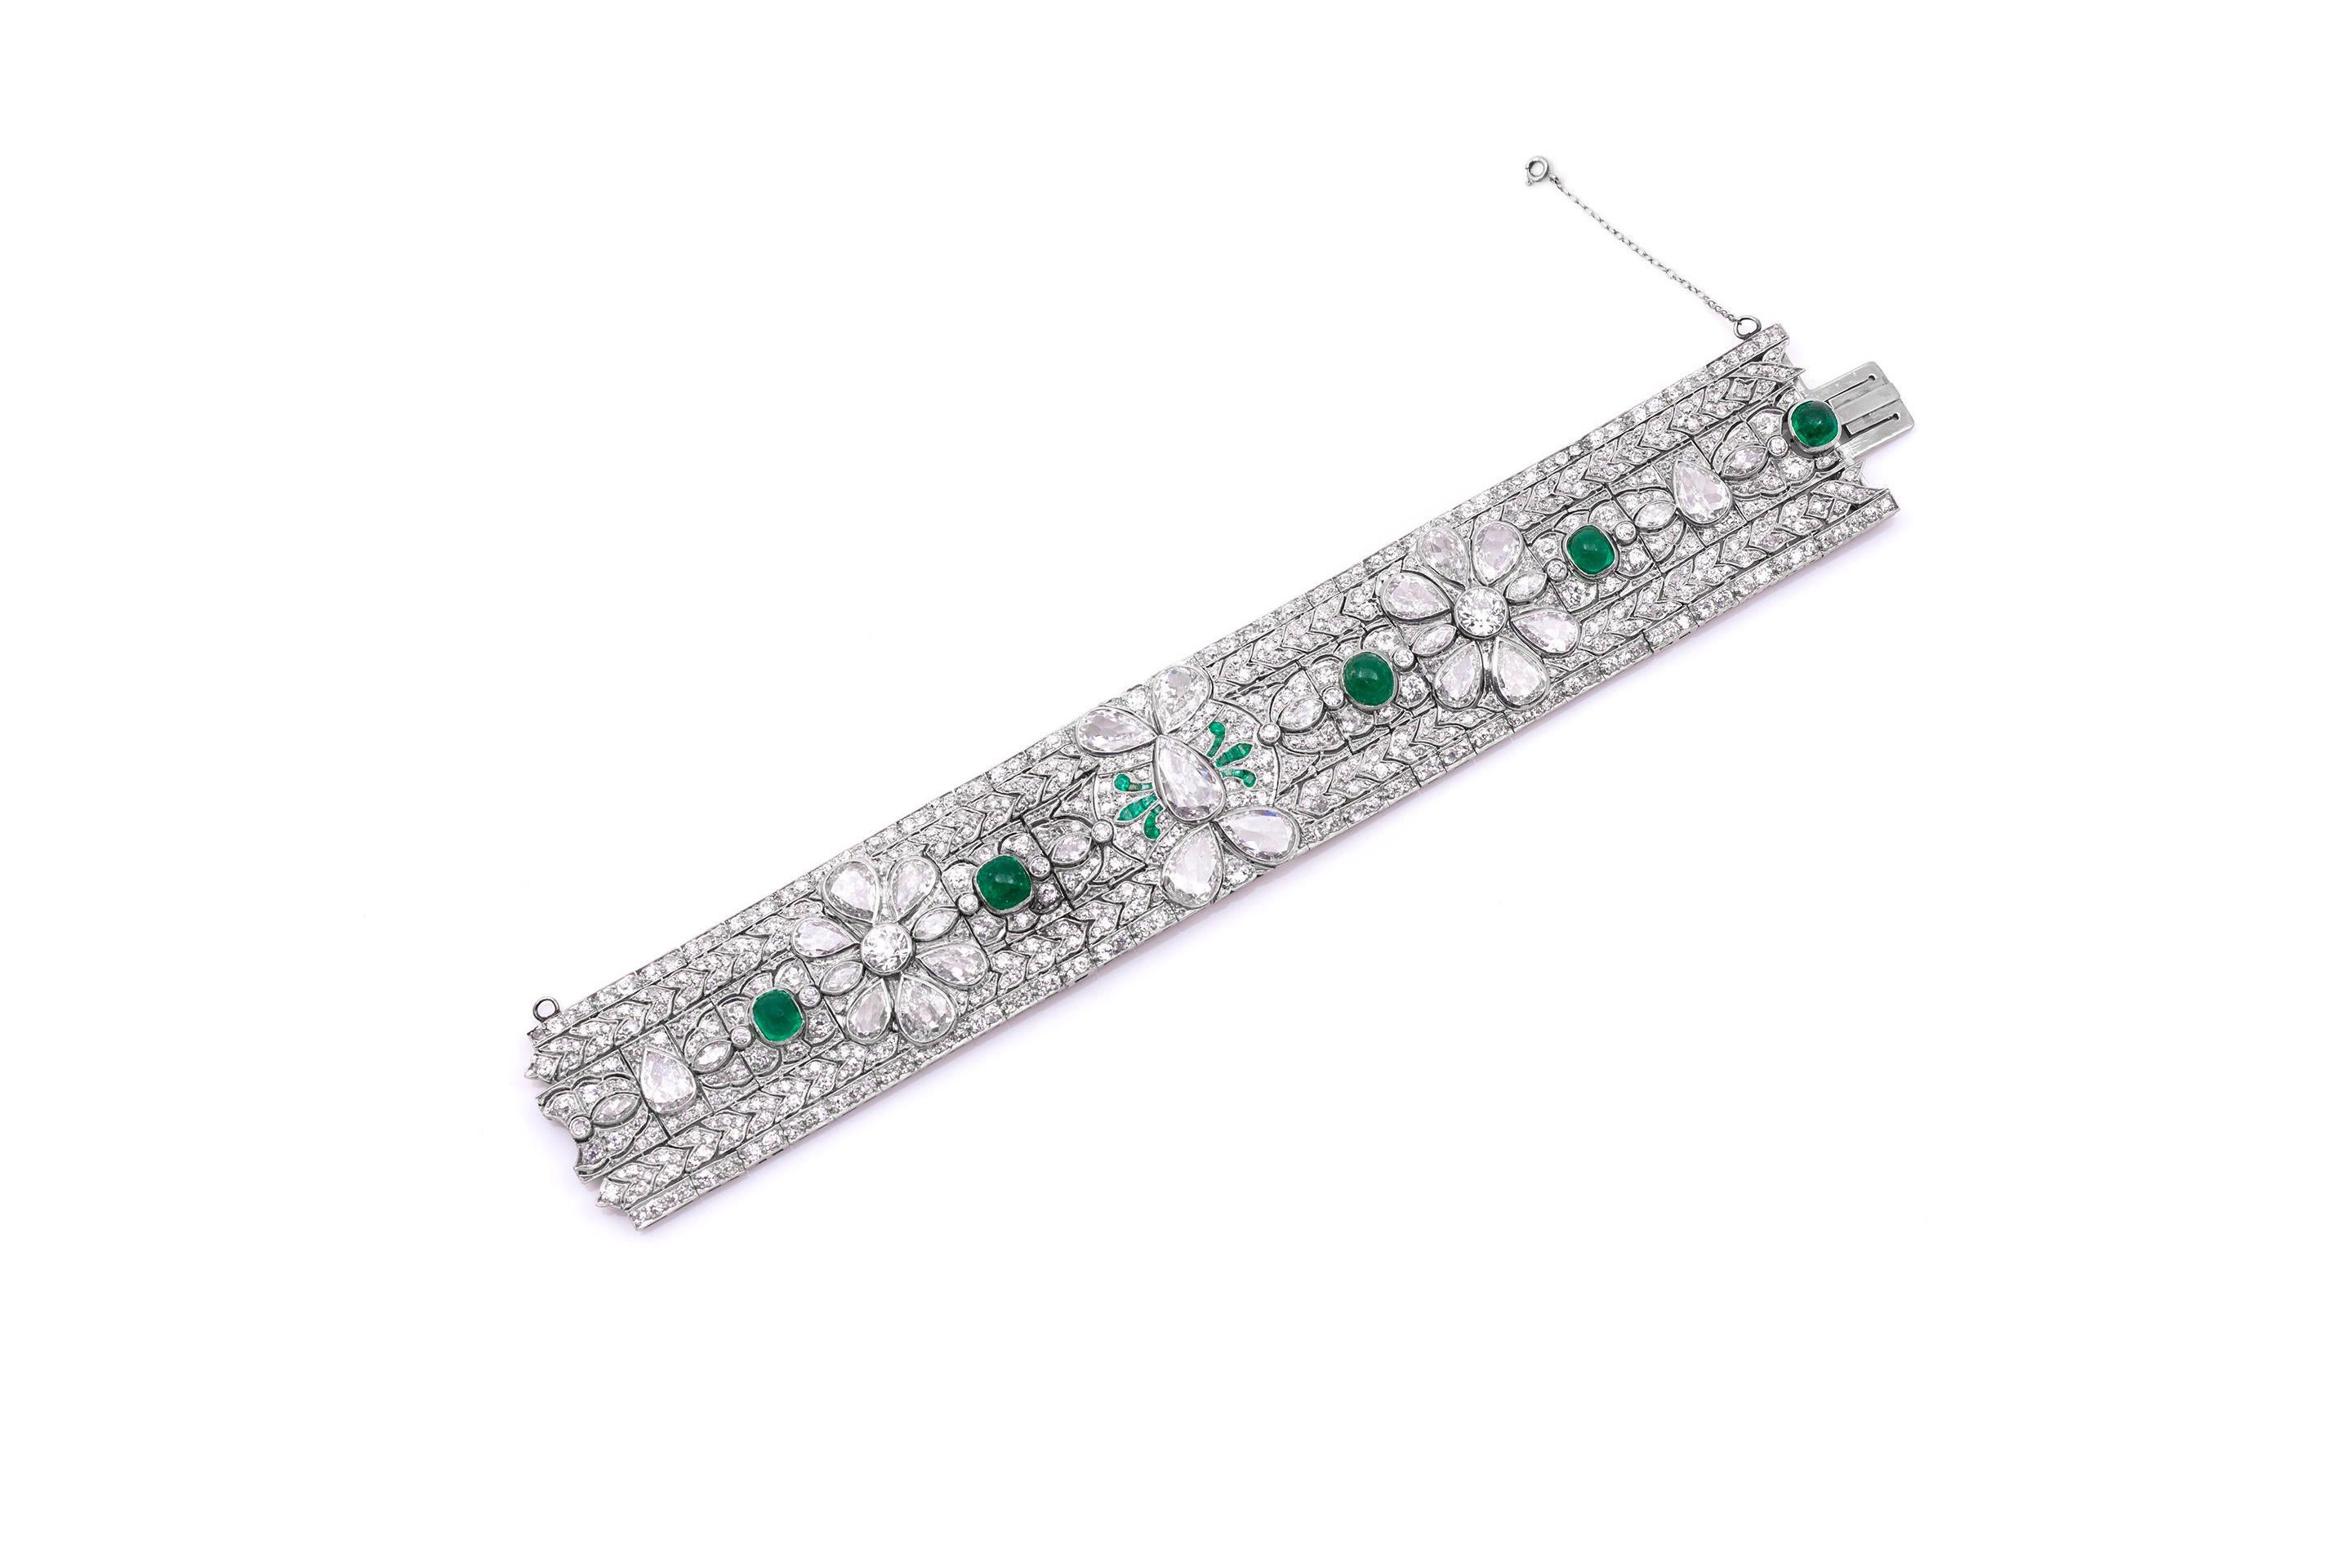 Finely crafted in platinum with Pear Shaped diamonds weighing approximately a total of 22.50 carats, Round and Marquise cut diamonds weighing a total of approximately 25.00 carats, and Cabochon Emeralds weighing approximately a total of 8.00